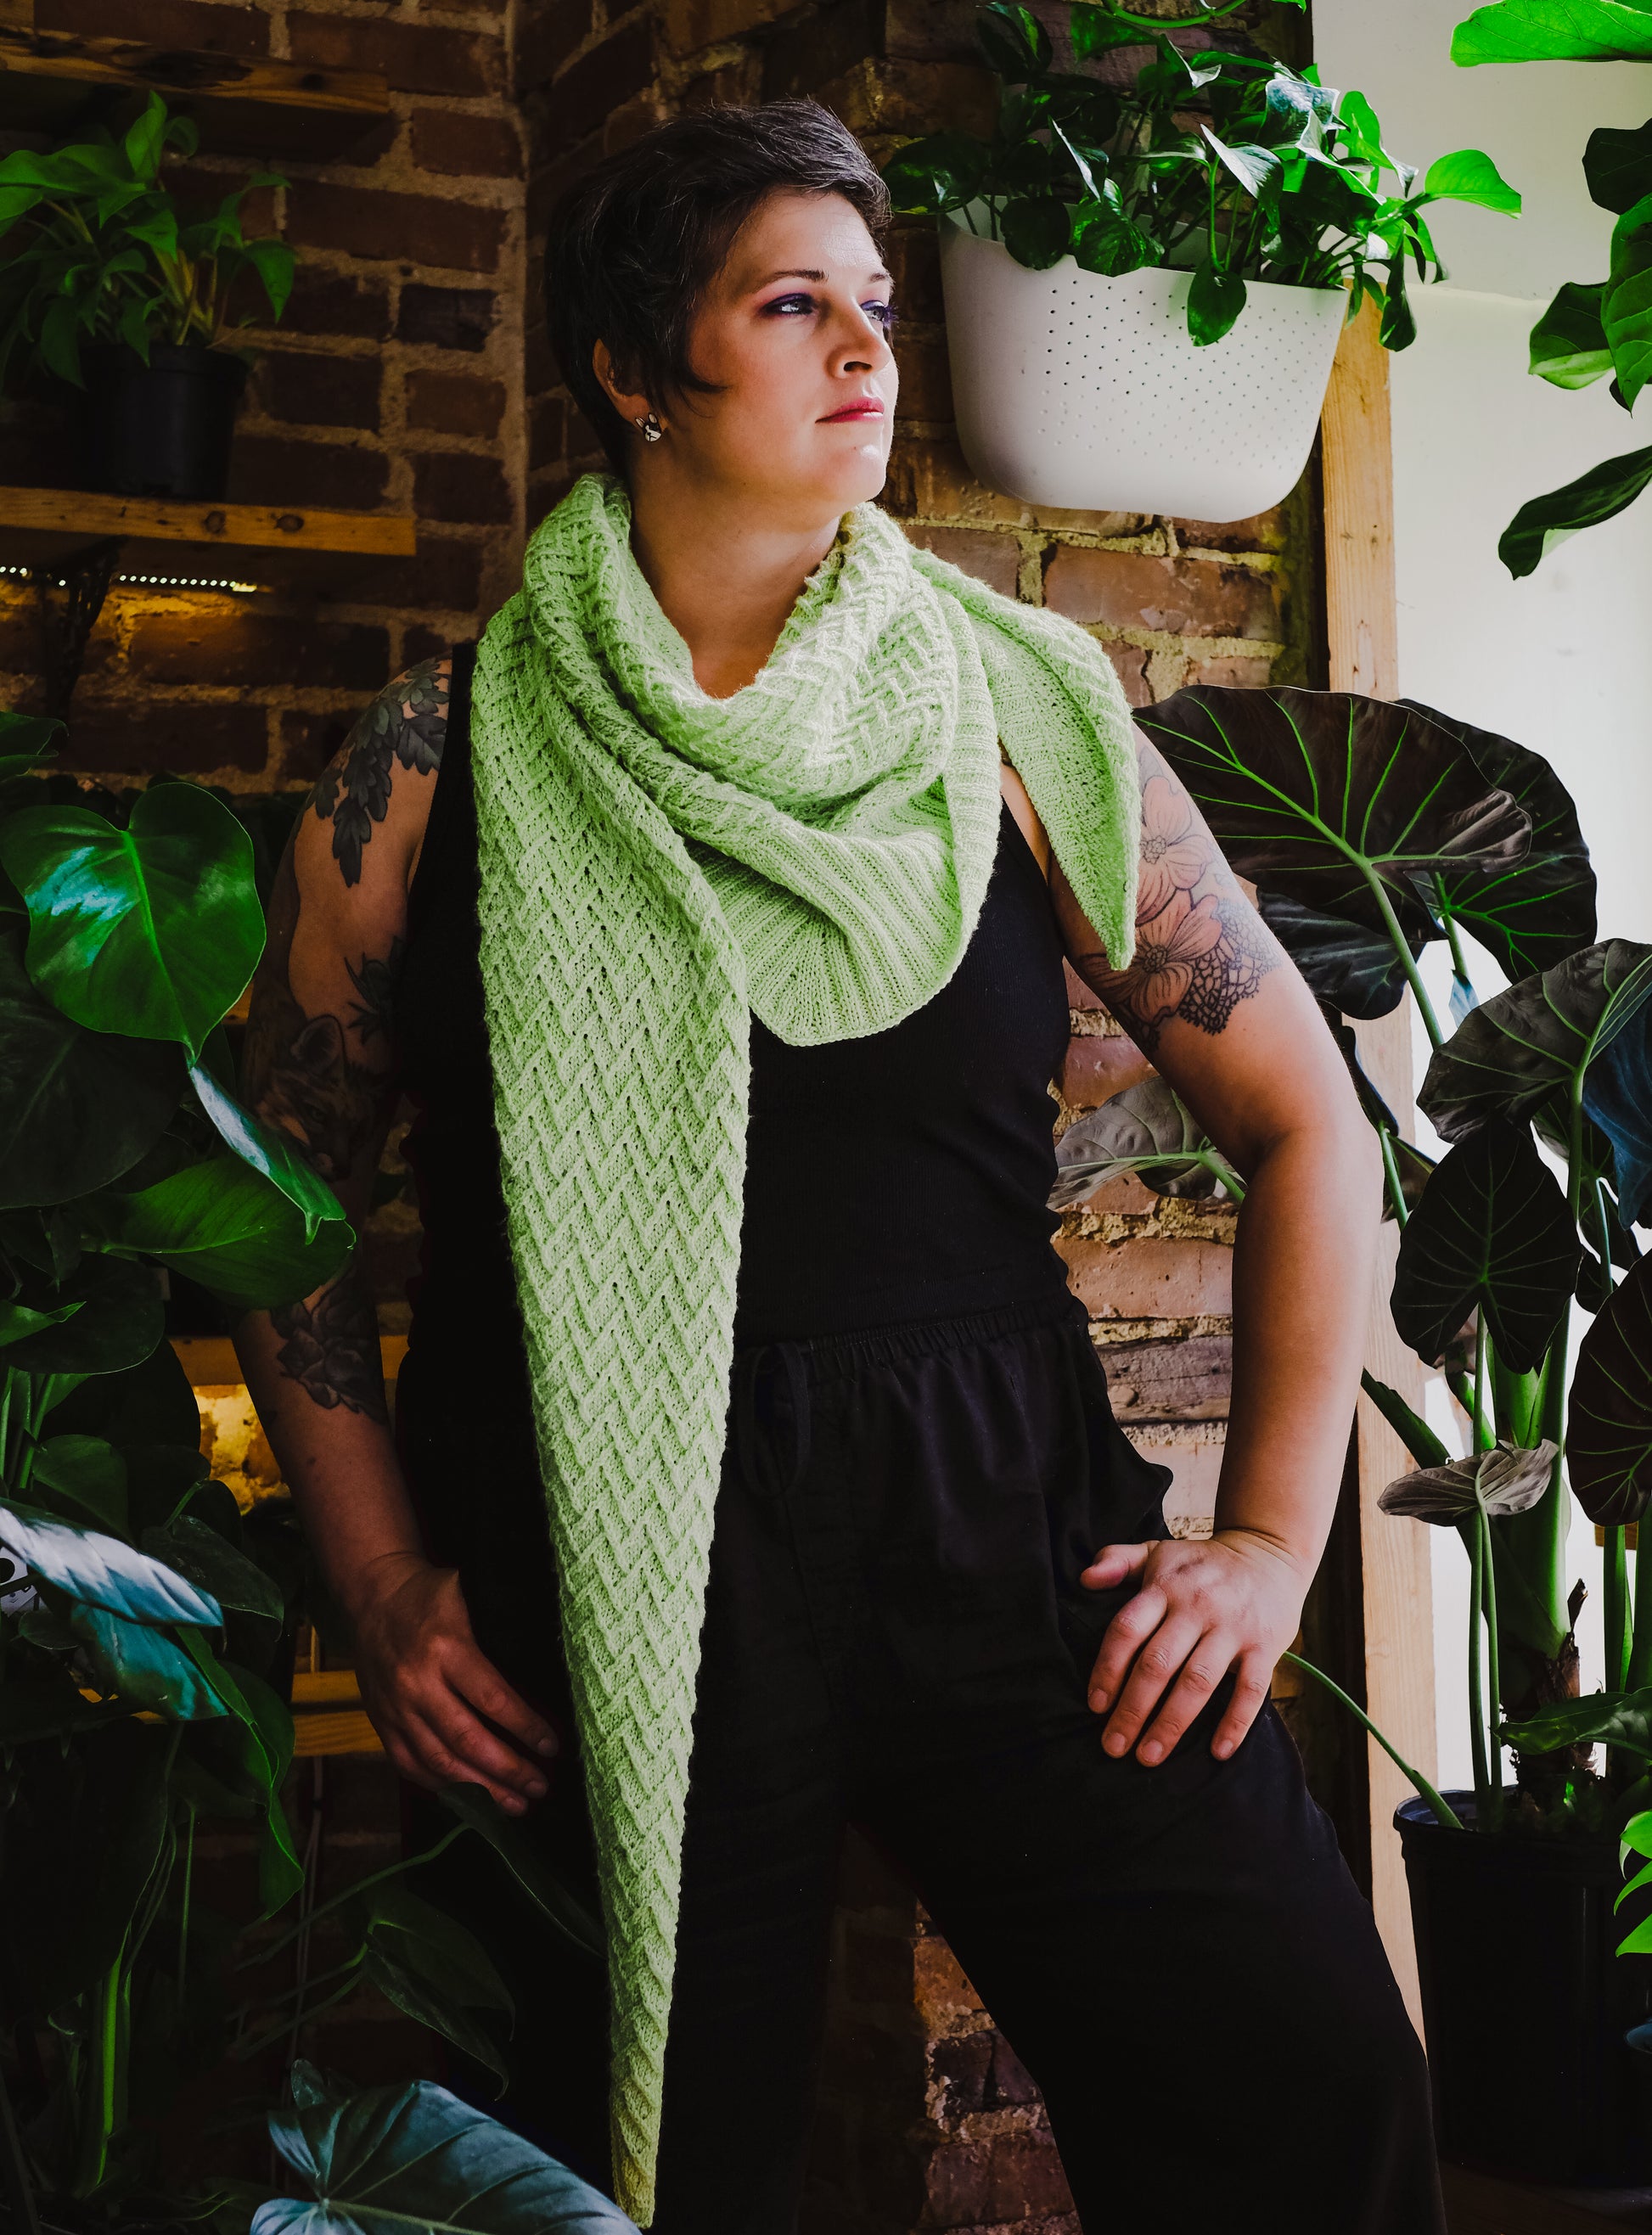 Jen stands, hands on her hips, looking off camera. She wears a black tank and pants under a lime green shawl, knit with chevron details in an asymmetric triangle.